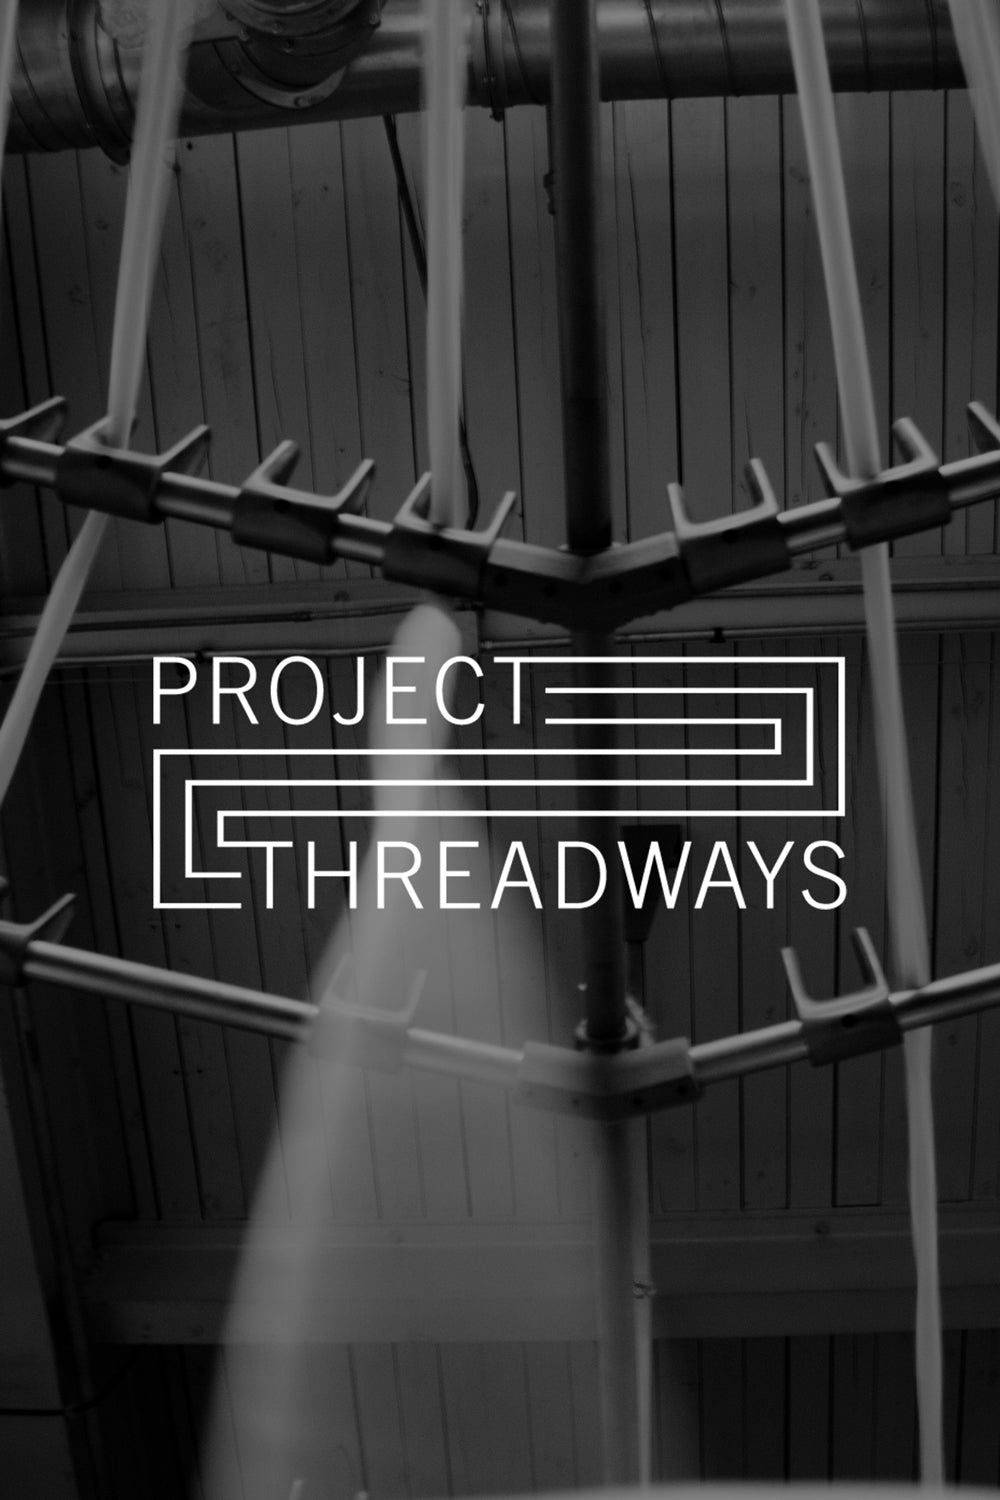 Image of cotton being spun into yarn with Project Threadways logo.